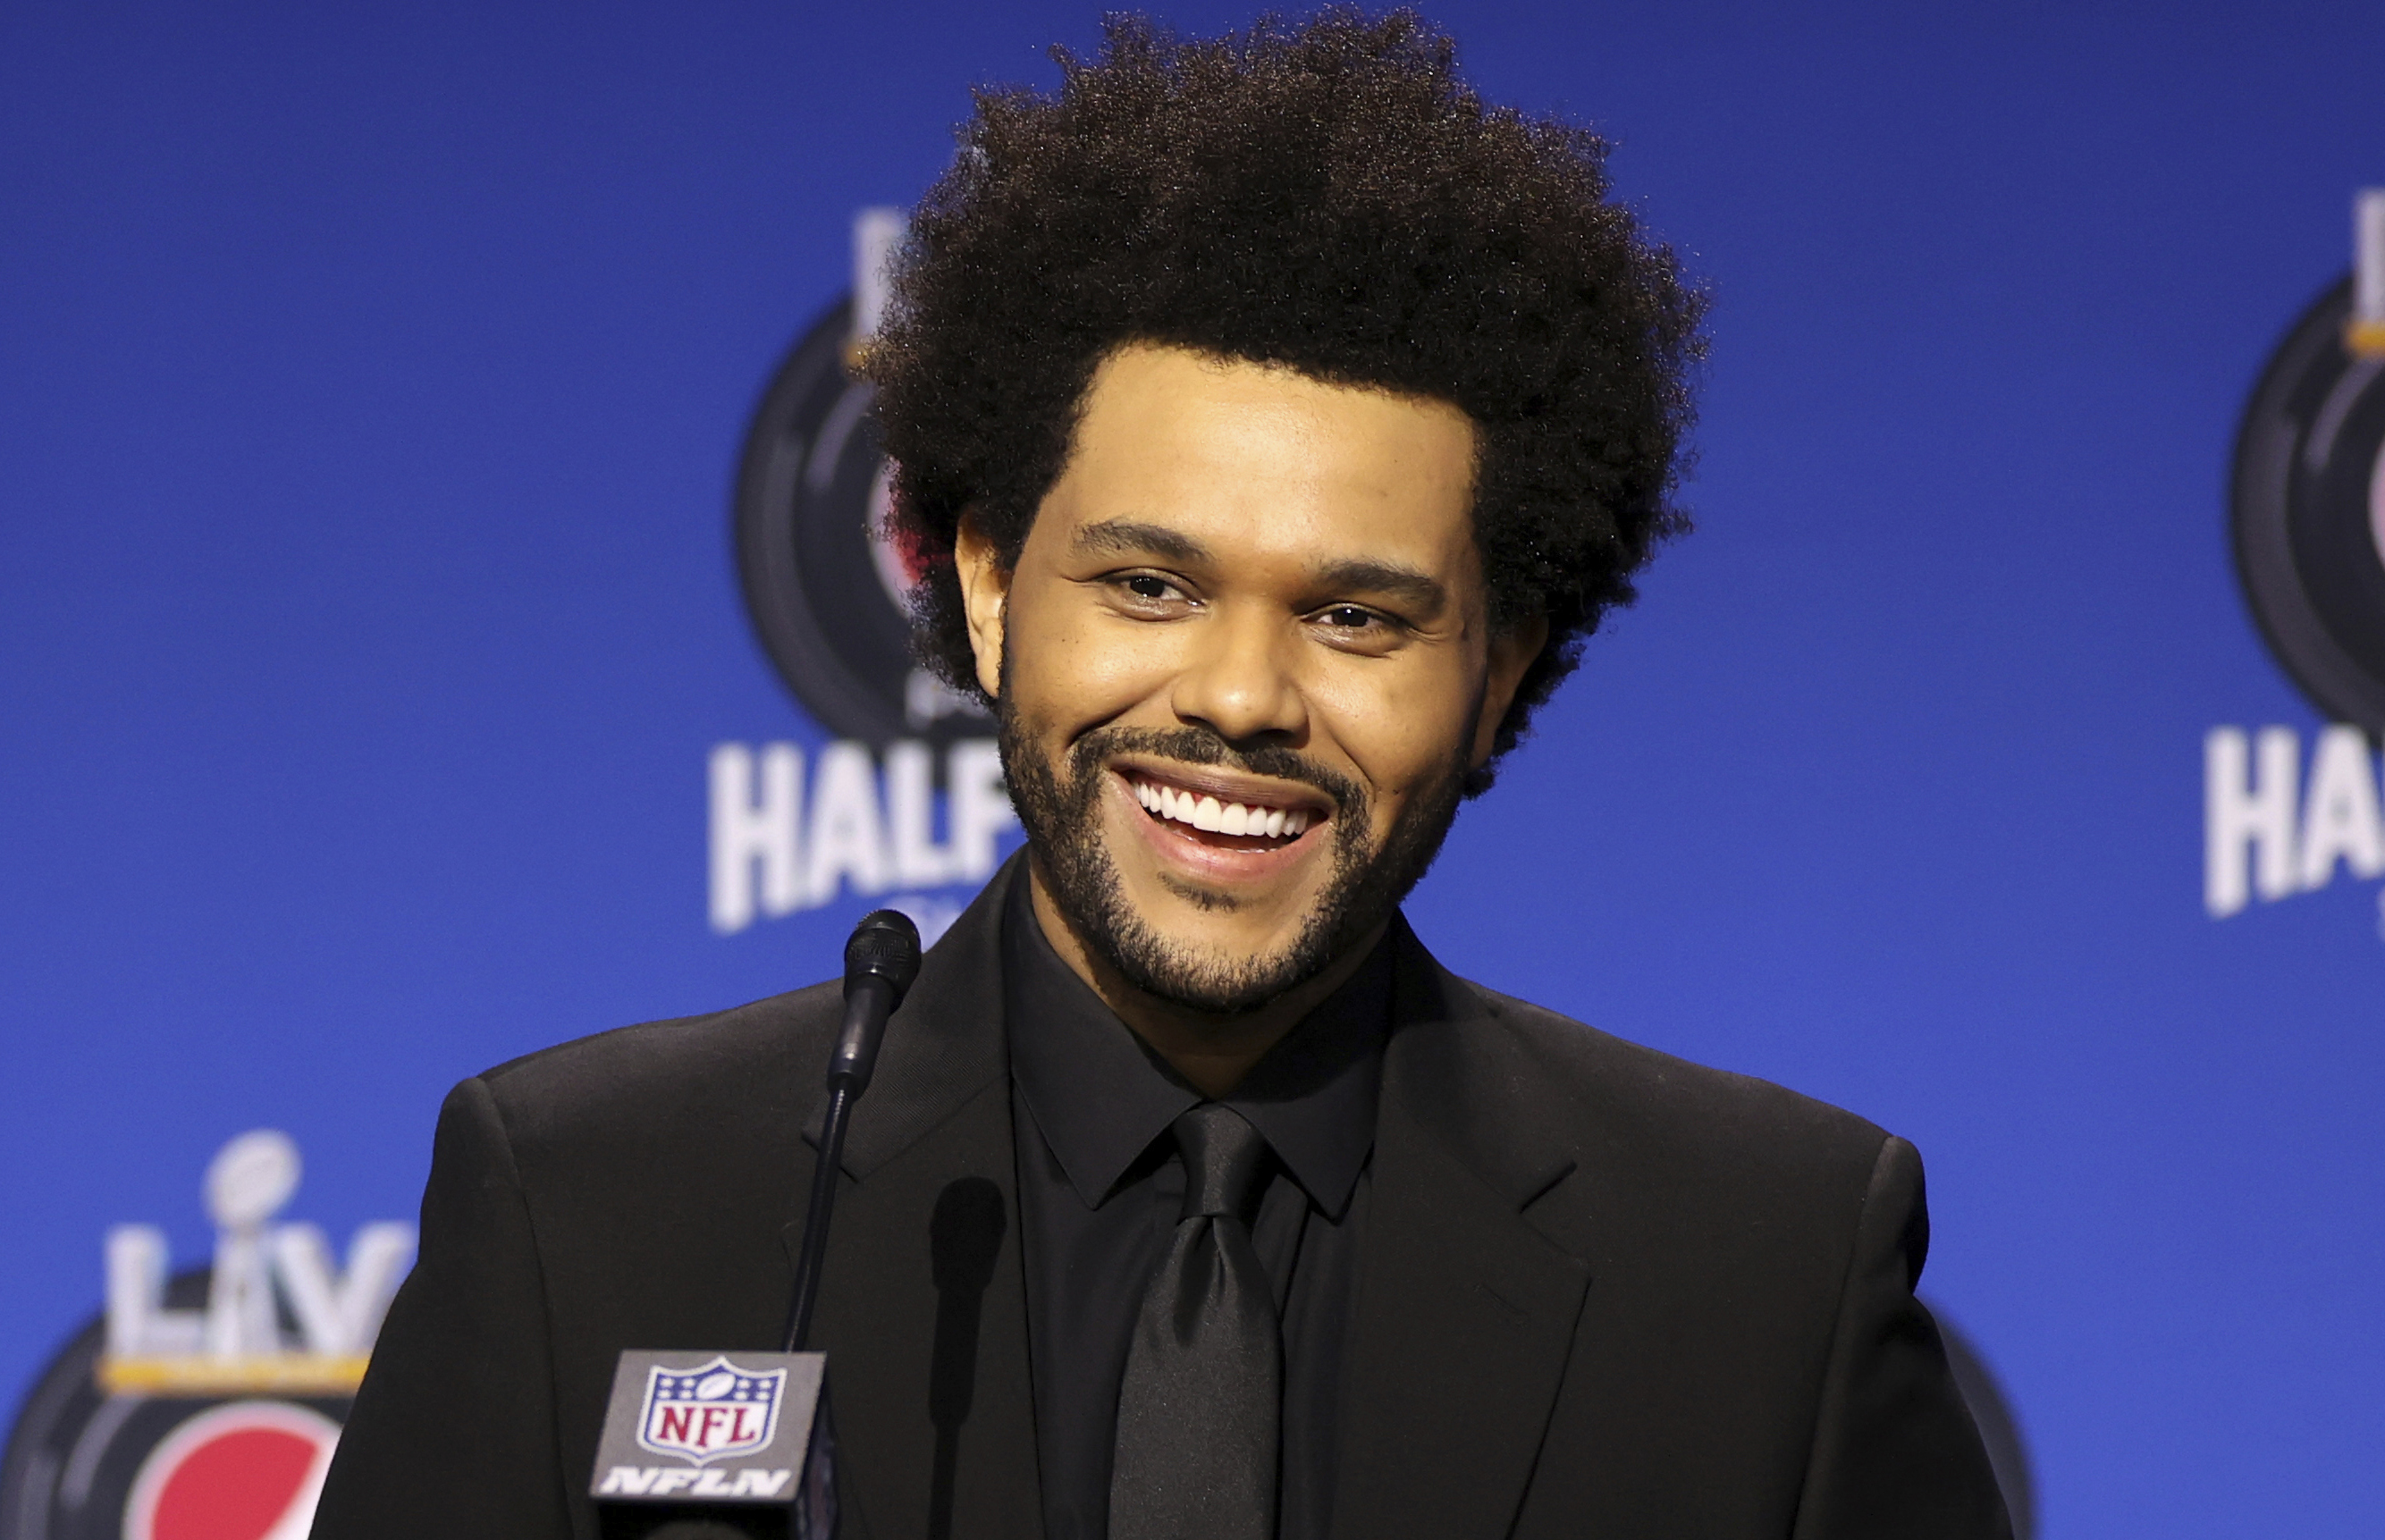 The Weeknd's Super Bowl Halftime Show Explained: The Meaning Behind the  Bandages and His 'After Hours' Era